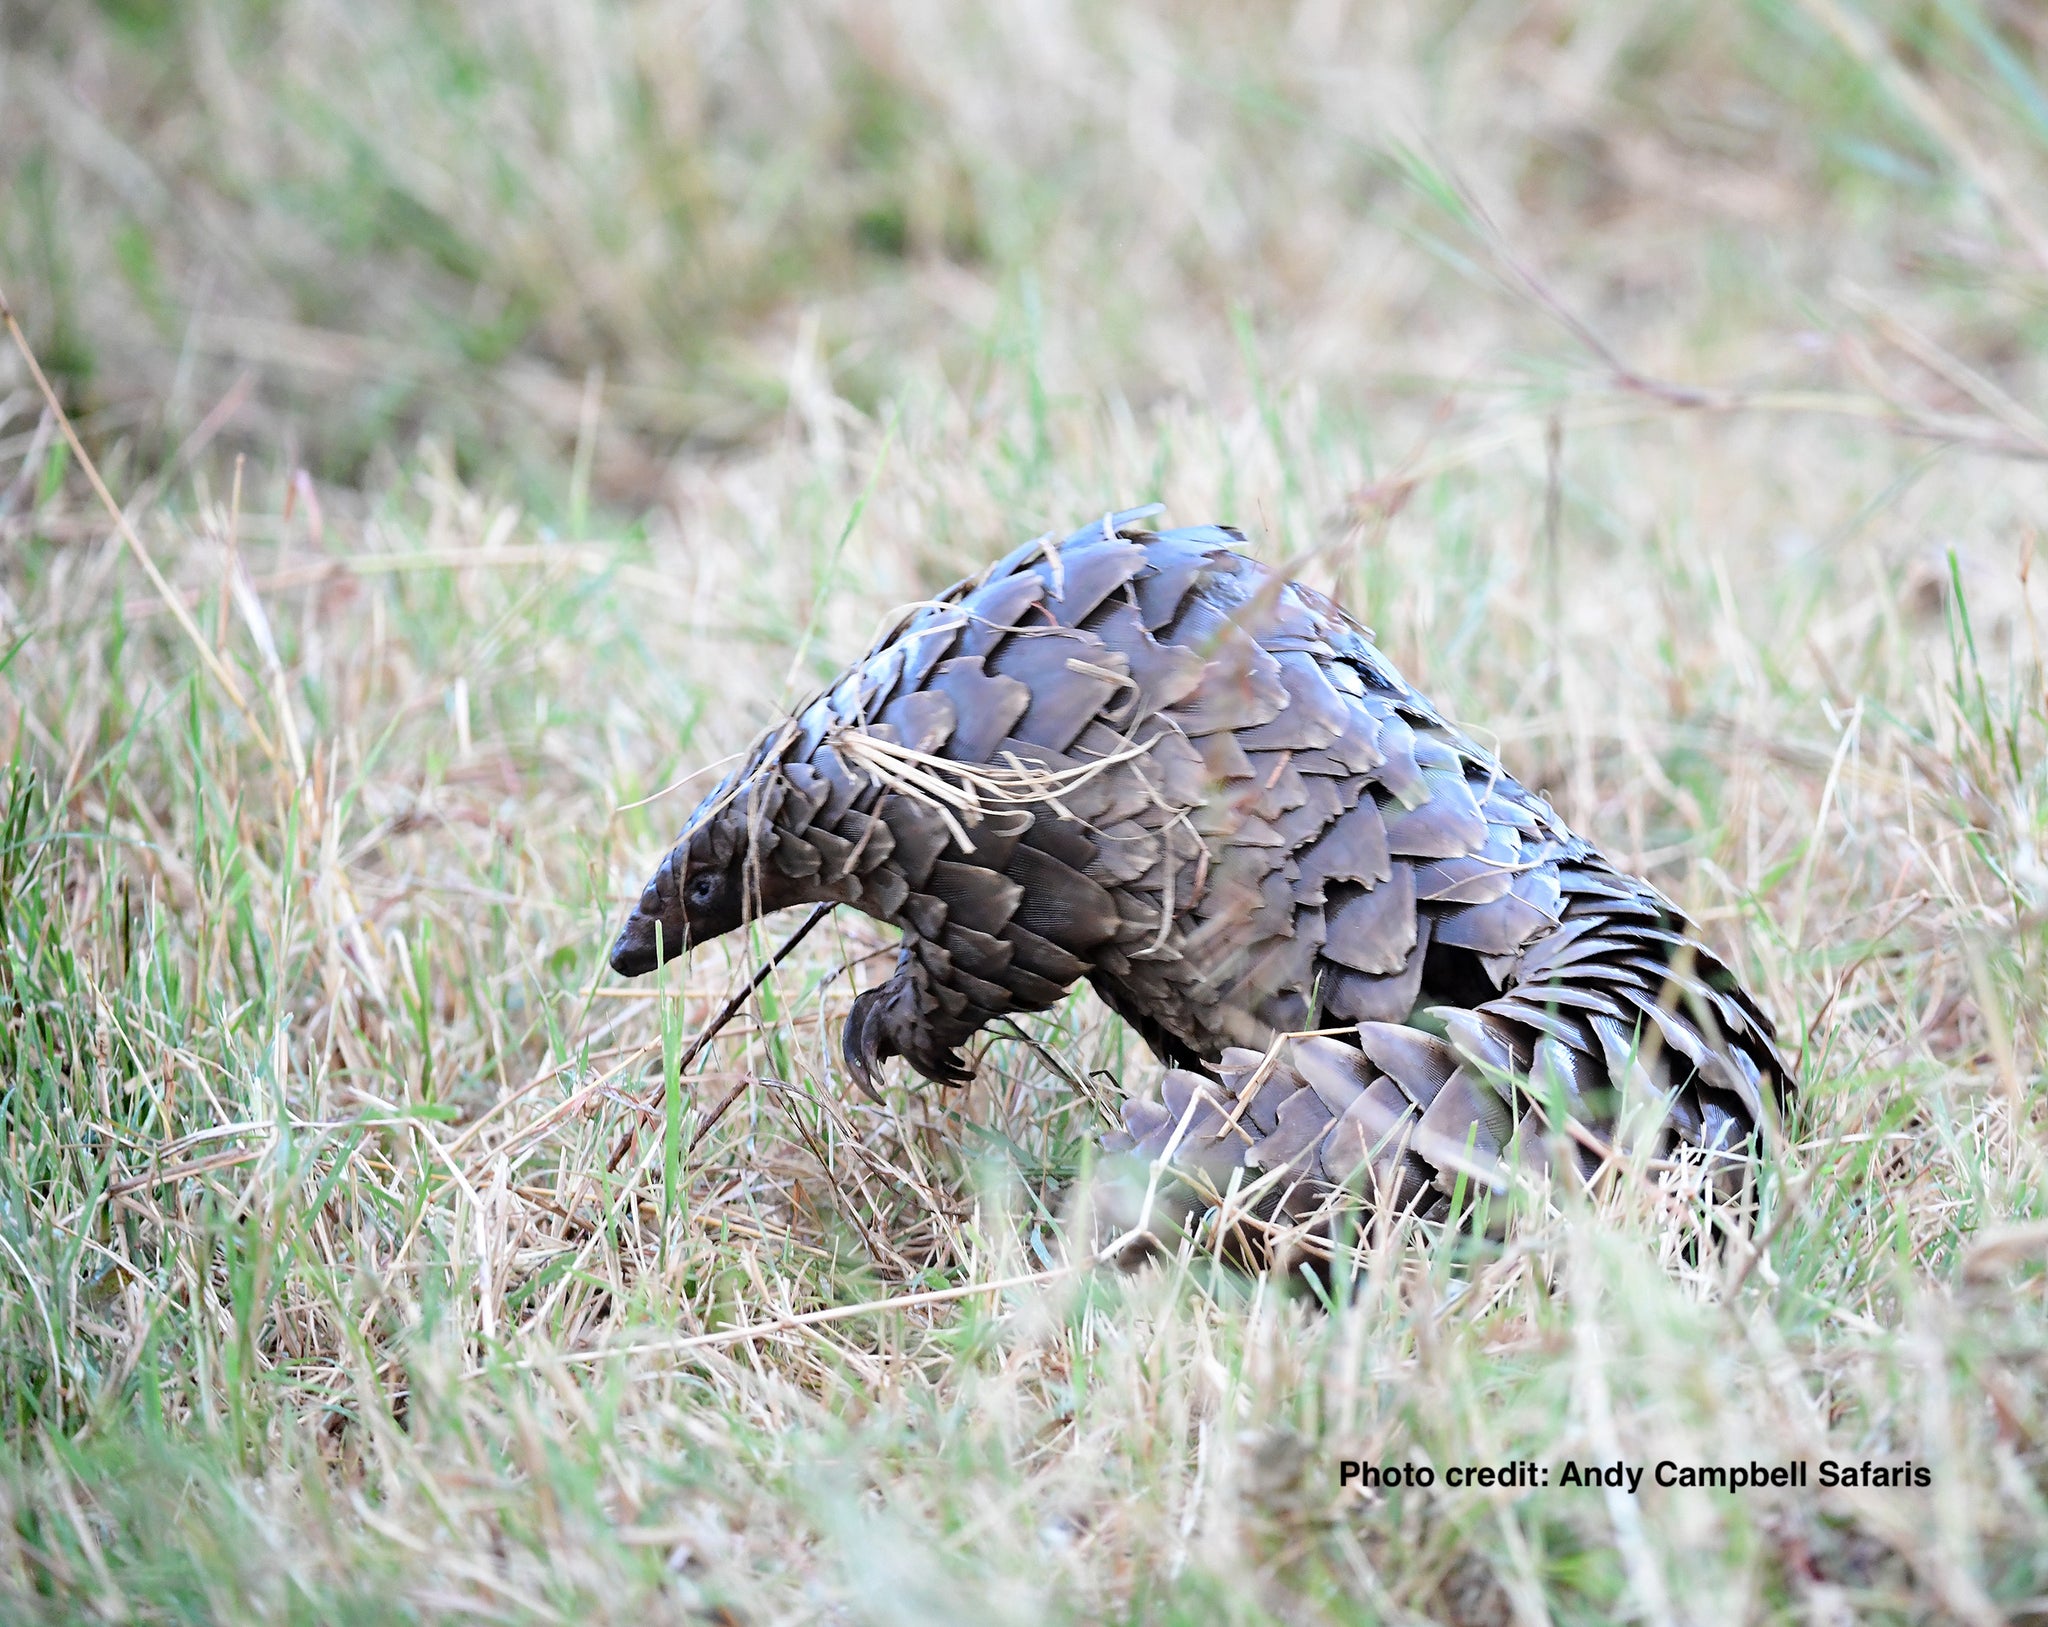 Rock and Stones partners with the Pangolin Project.